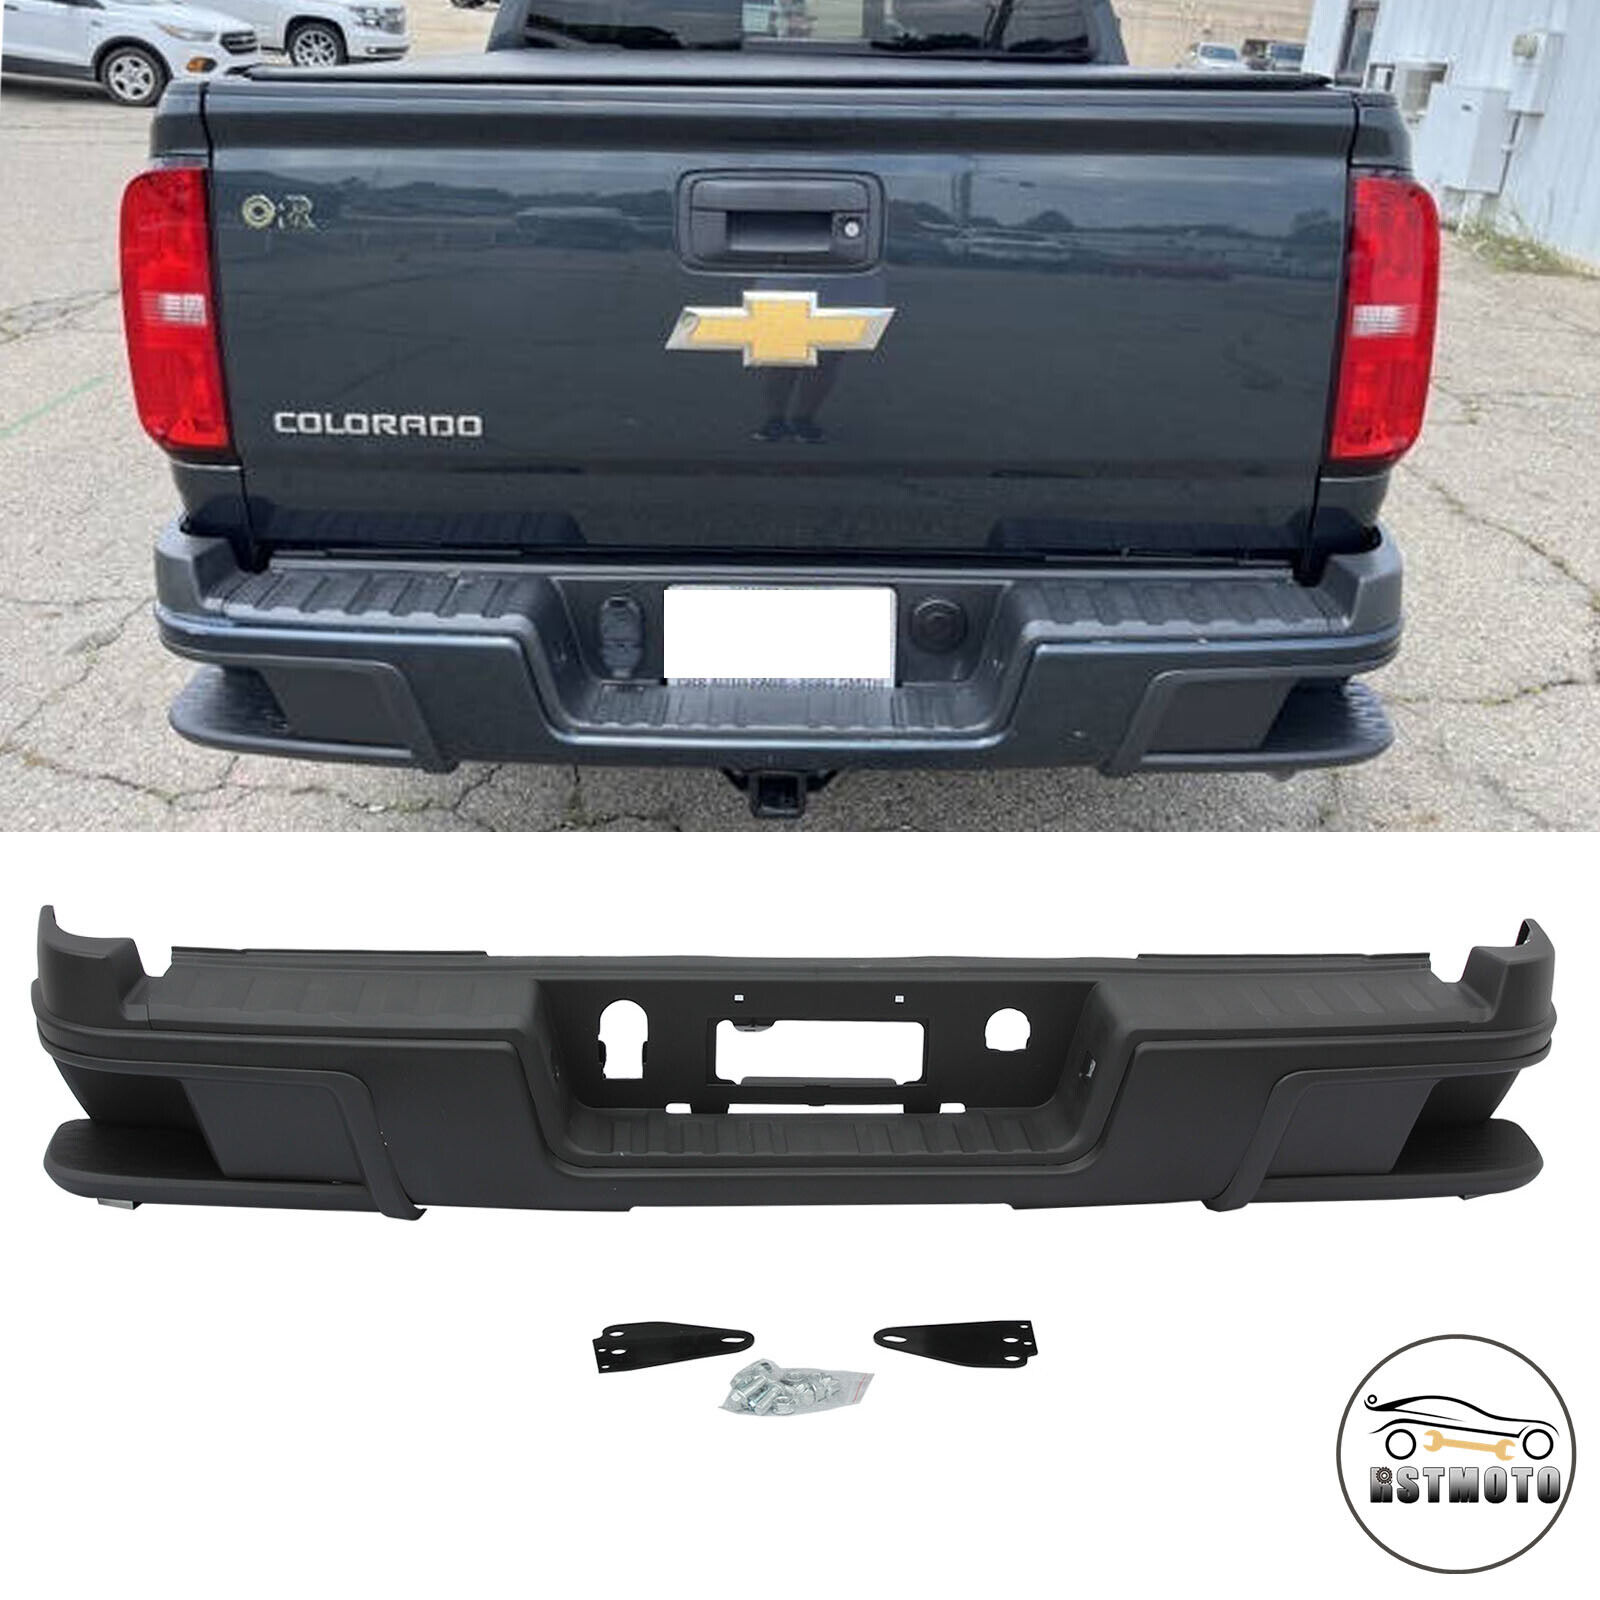 Powder-Coated Rear Step Bumper Assembly for 2015-2022 Chevy Colorado GMC Canyon